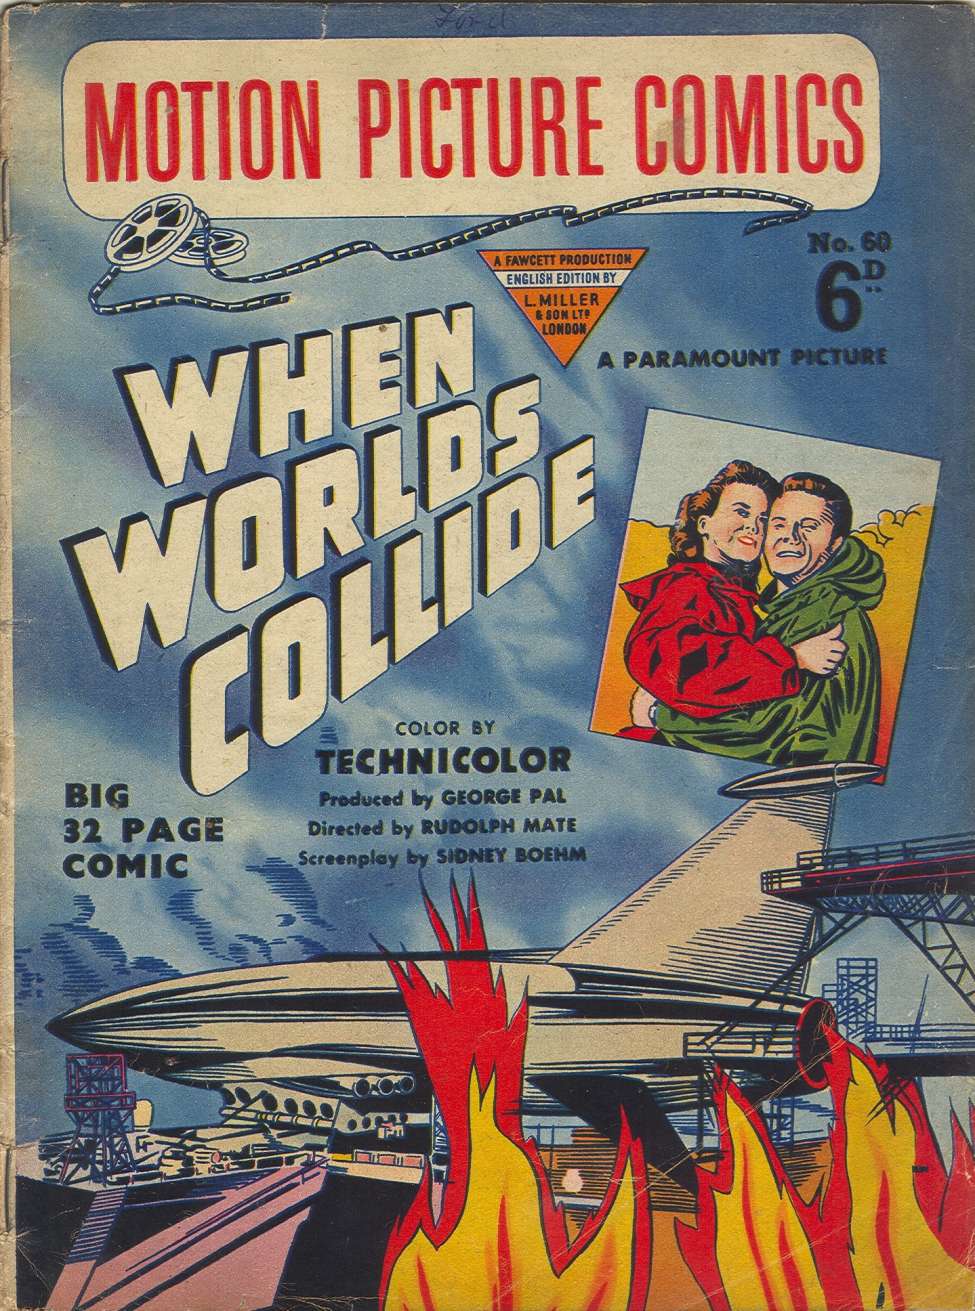 Book Cover For Motion Picture Comics UK 60 (When Worlds Collide)